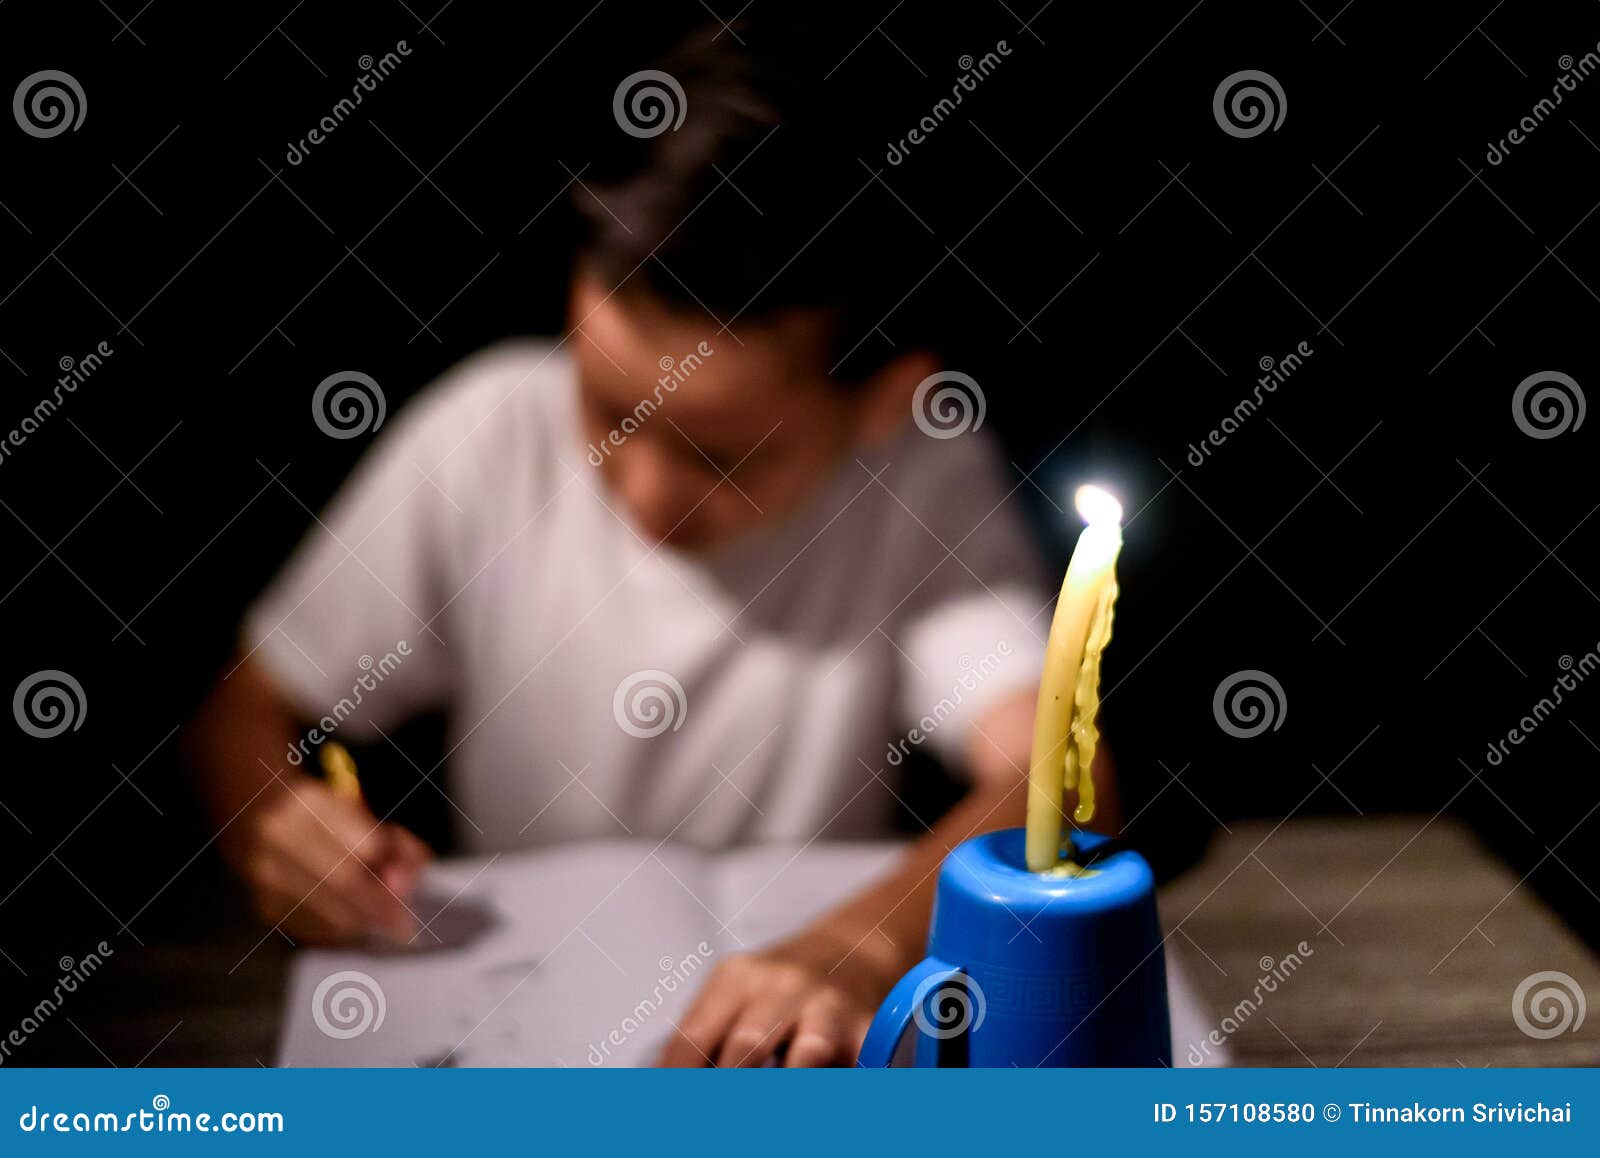 while doing your school homework the candle